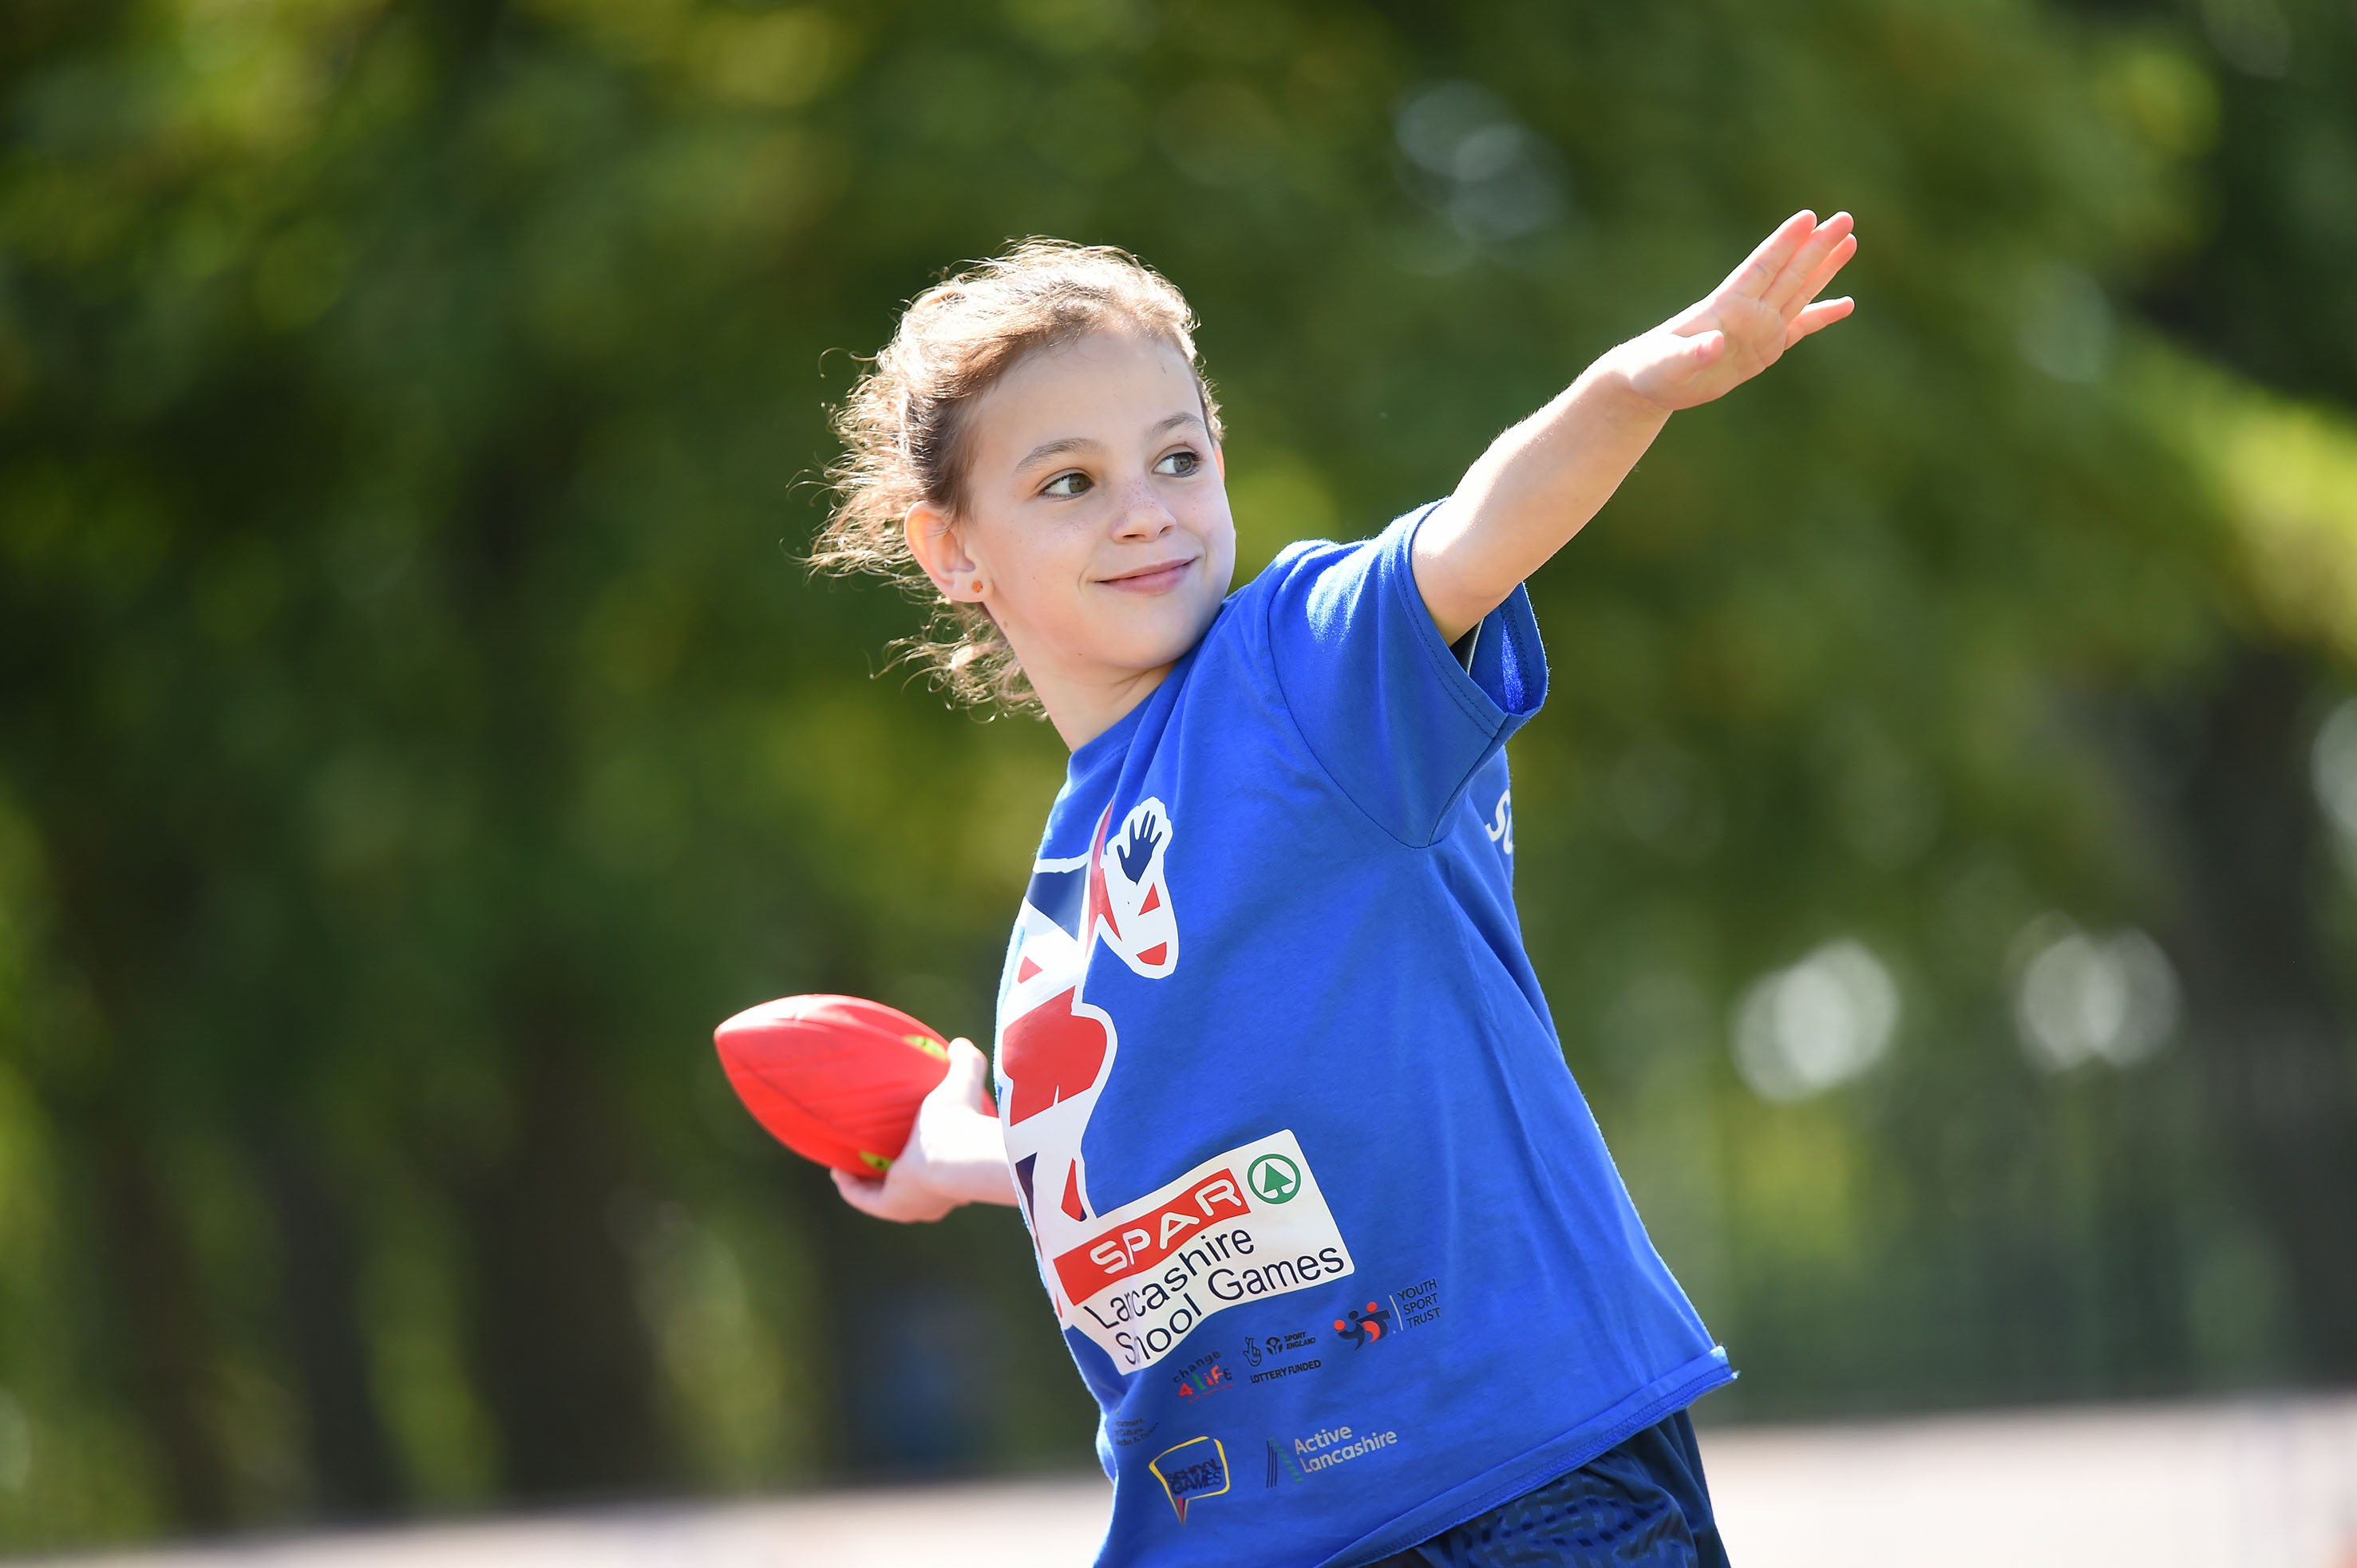 Lancashire School Games - South Ribble, Amber, Moss Side Primary vortex throw